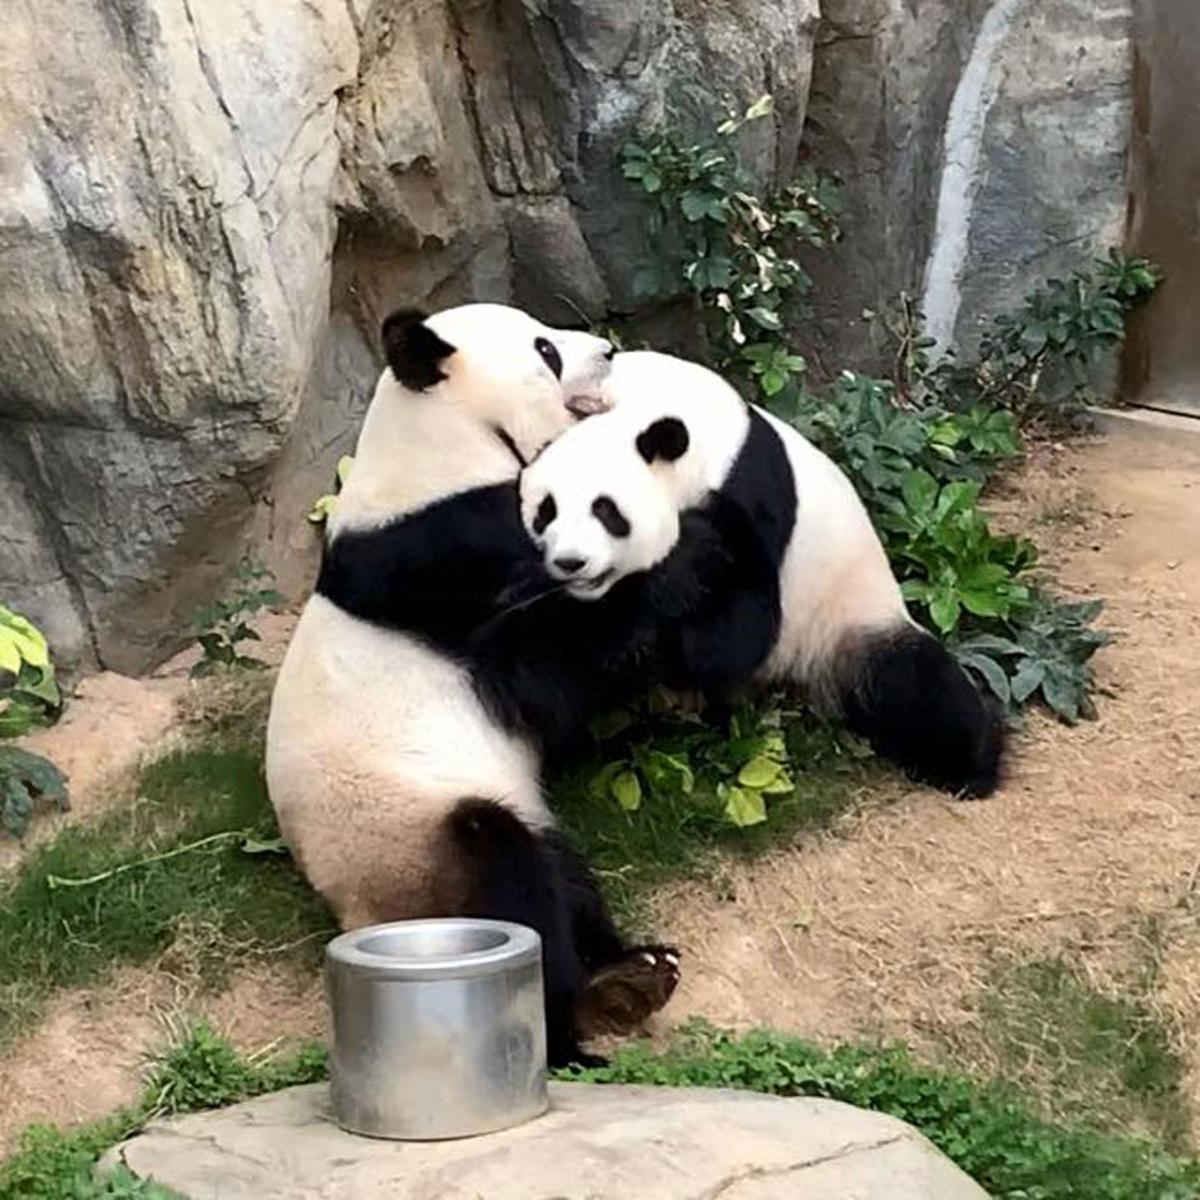 A Zoo Has Been Trying To Get Two Pandas To Mate For 10 Years When